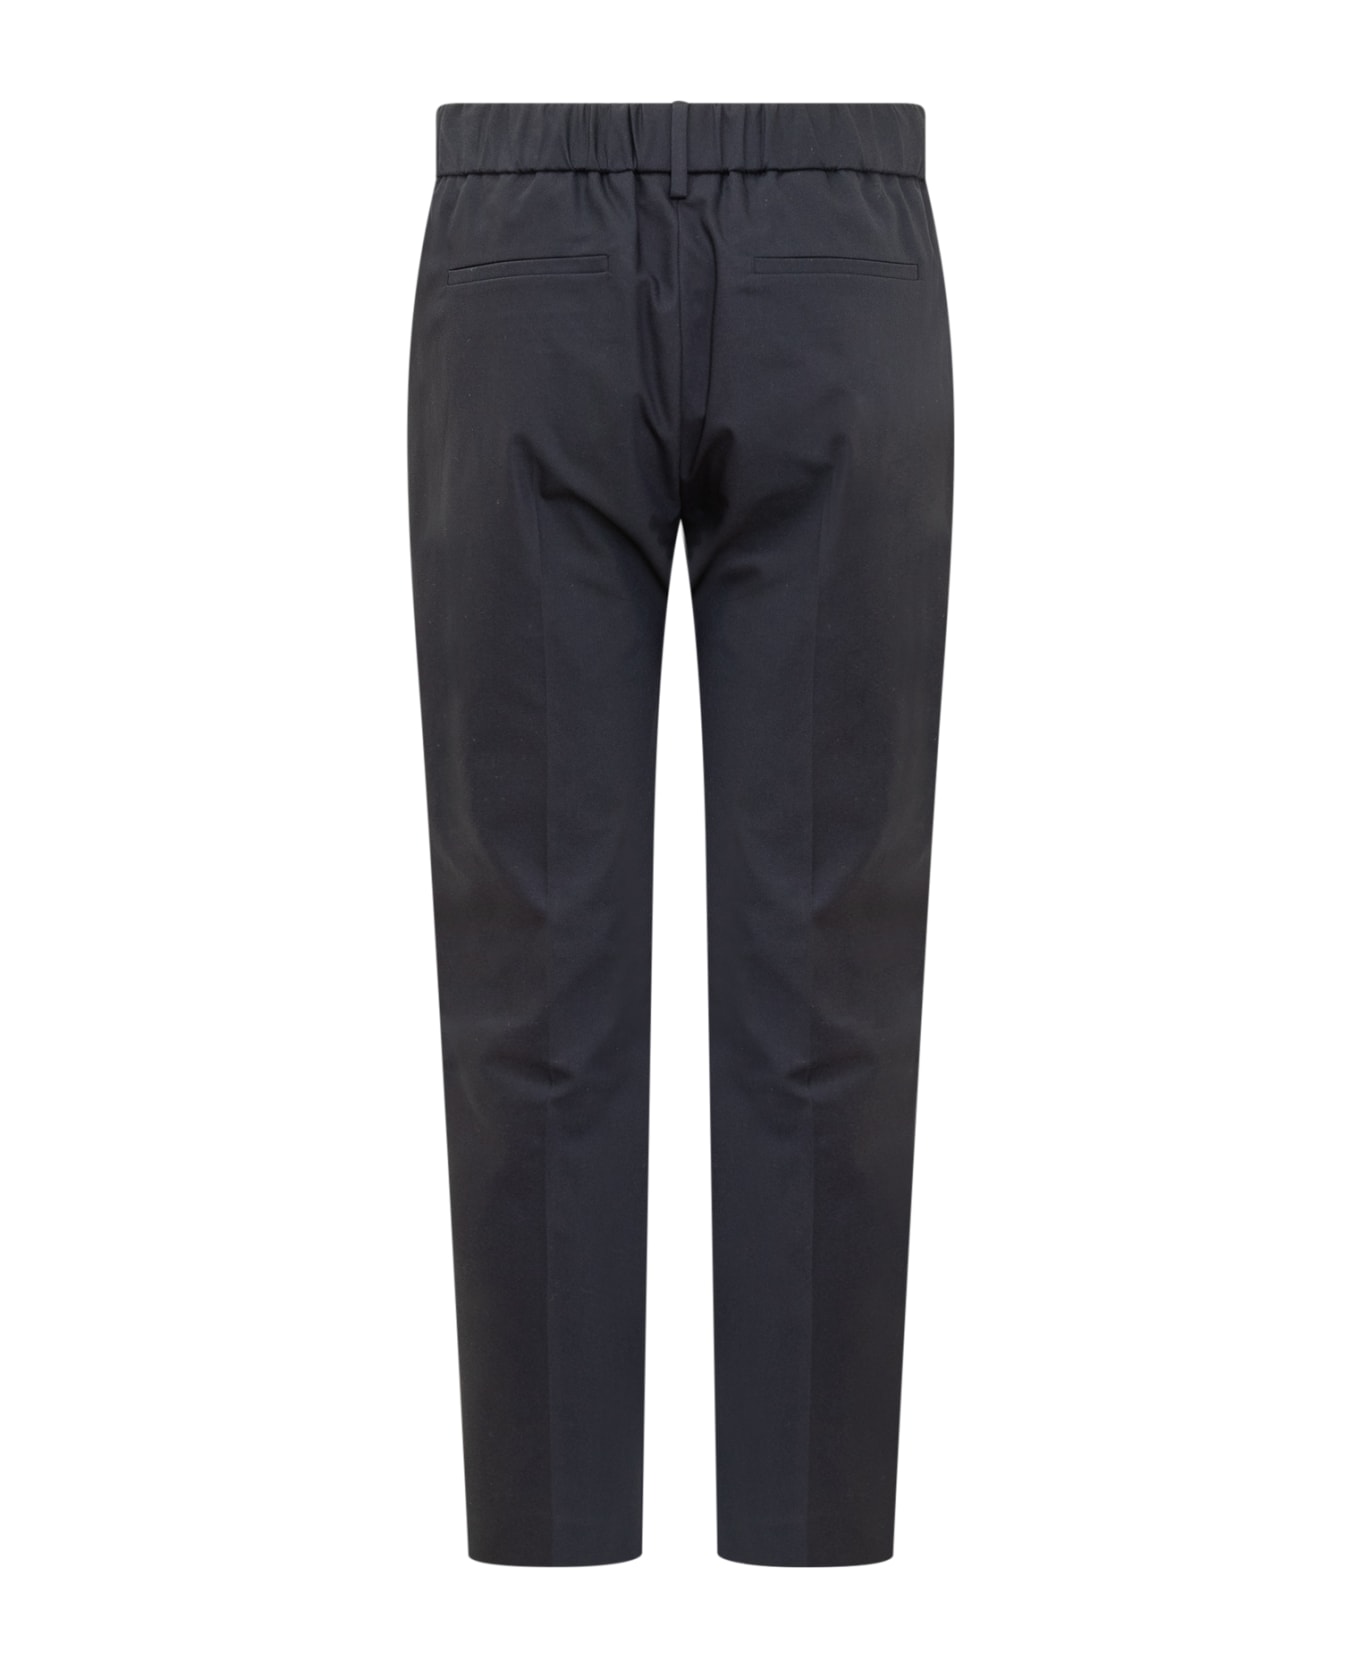 Brunello Cucinelli Stretch Cotton Trousers With Elastic Waistband And Small Pleats On The Front - Midnight ボトムス